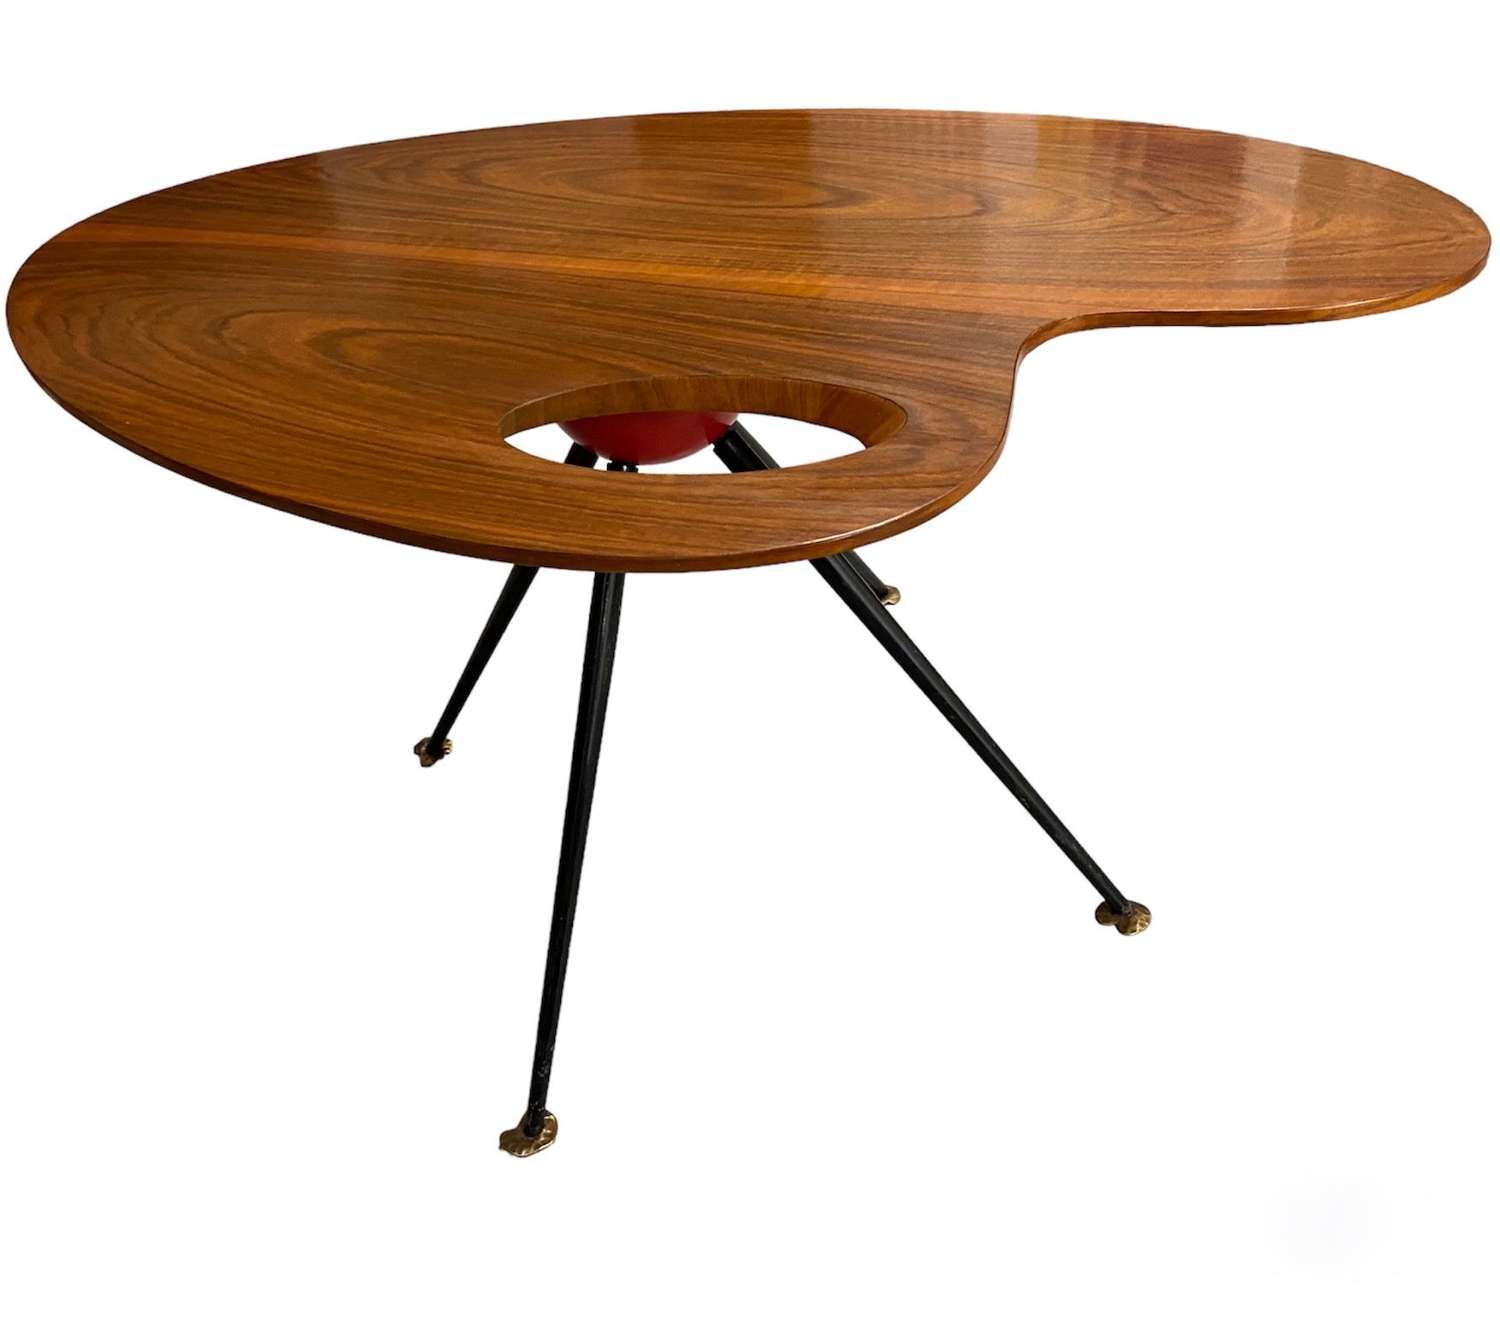 Organic shaped mid-century table in the manner of Gio Ponti